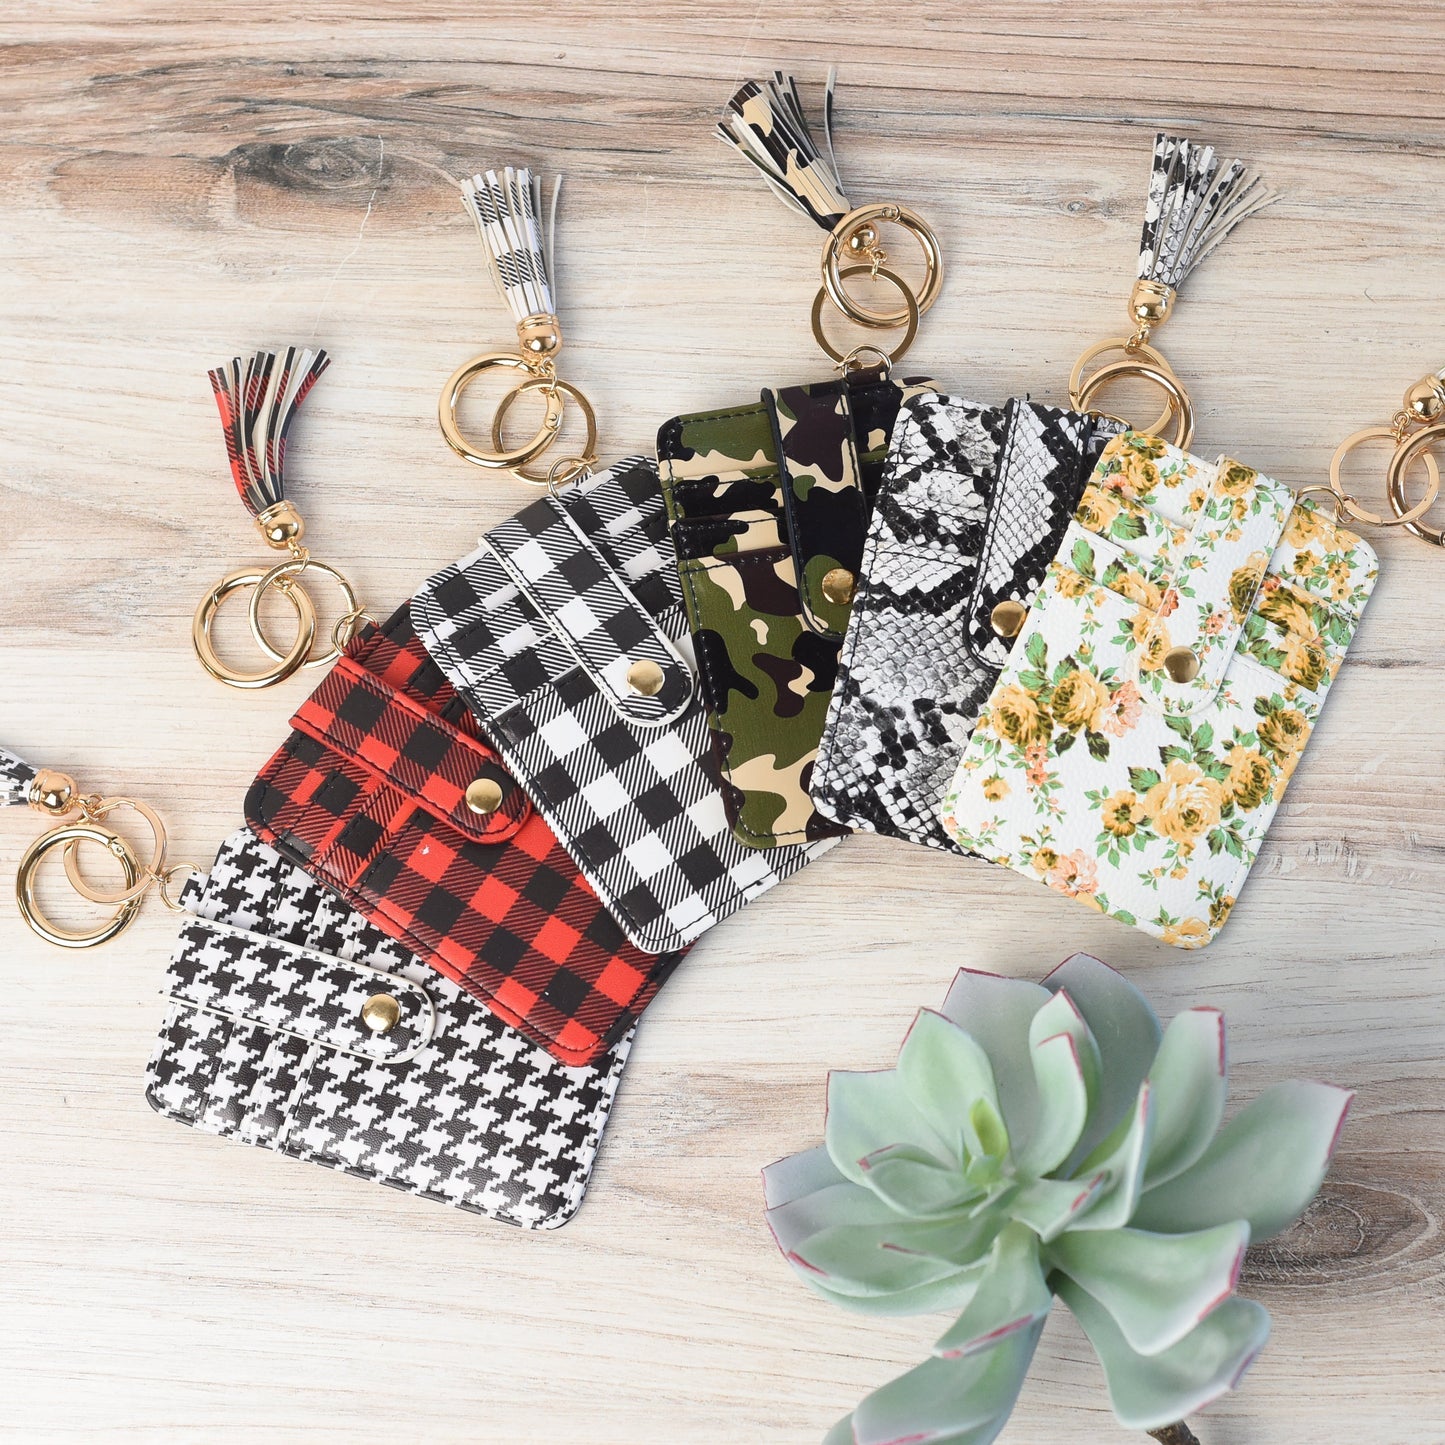 Candace Keychain Card Wallet-Black and White Buffalo Plaid